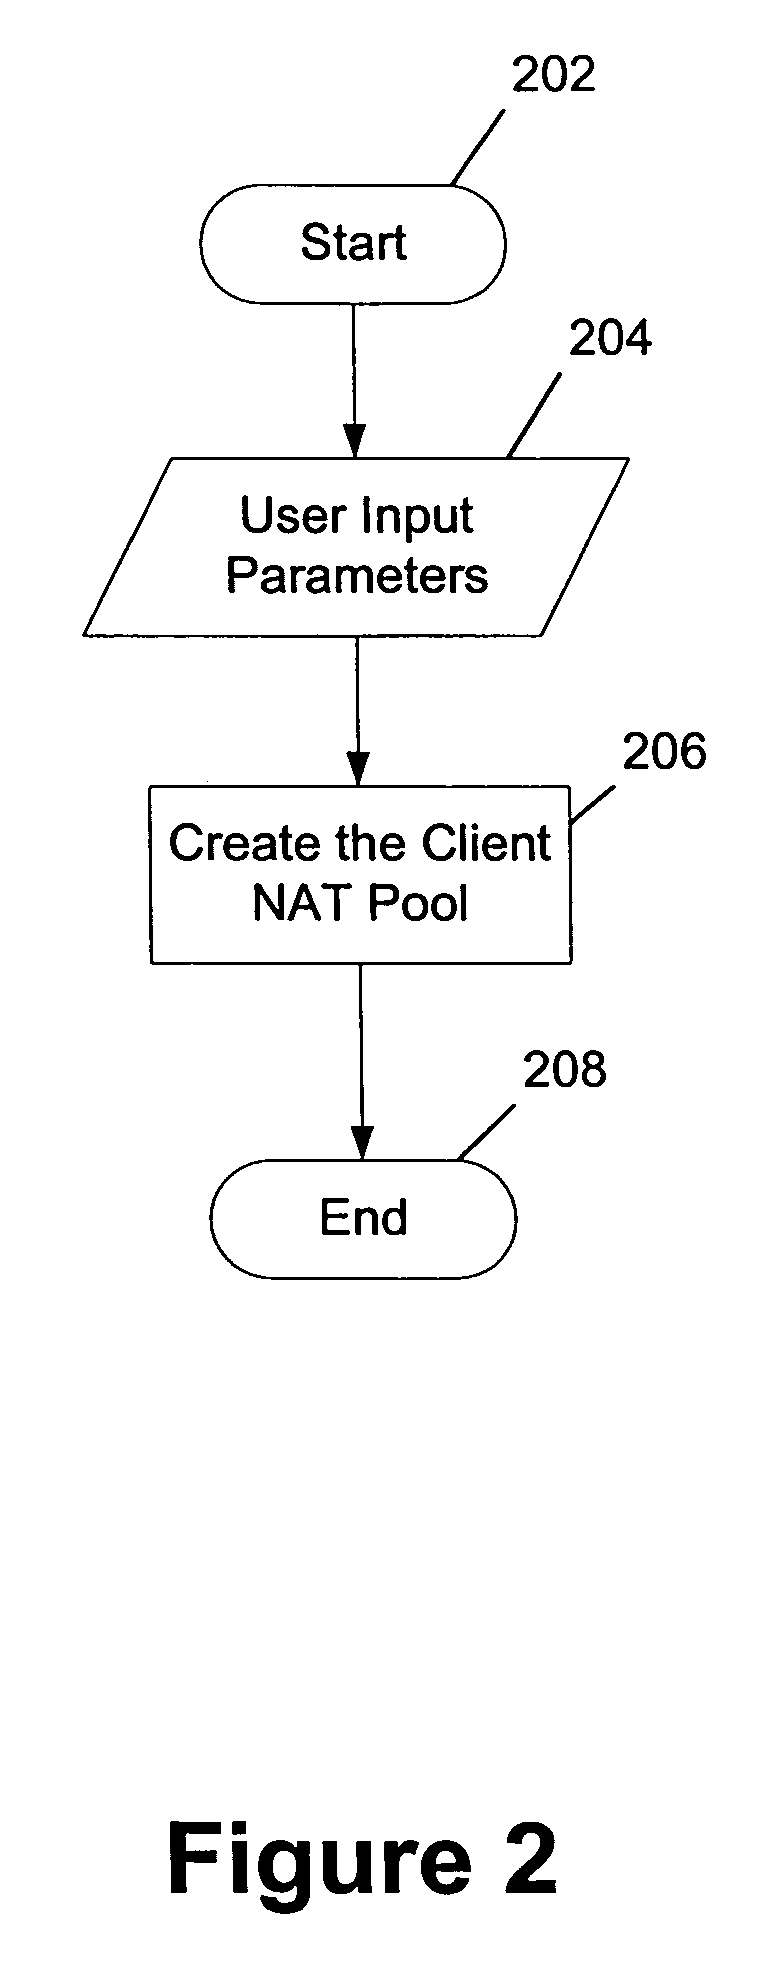 Method allocation scheme for maintaining server load balancers services in a high throughput environment